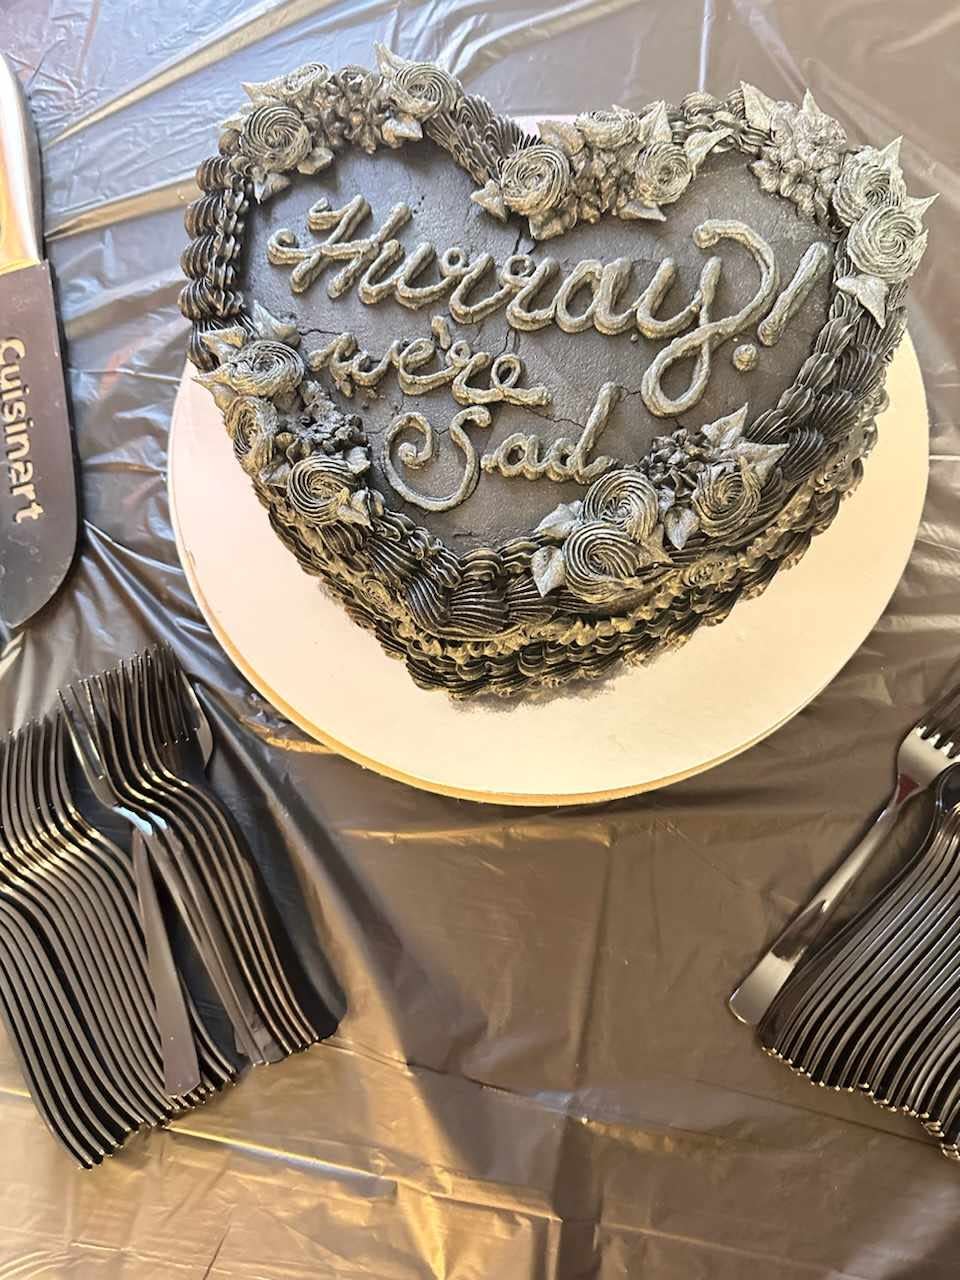 Grief Party host and organizer Liz Liano ordered a custom cake from No Worries Bakery for the event.The confection’s message encapsulates the seemingly conflicting emotions the party brought out in people.